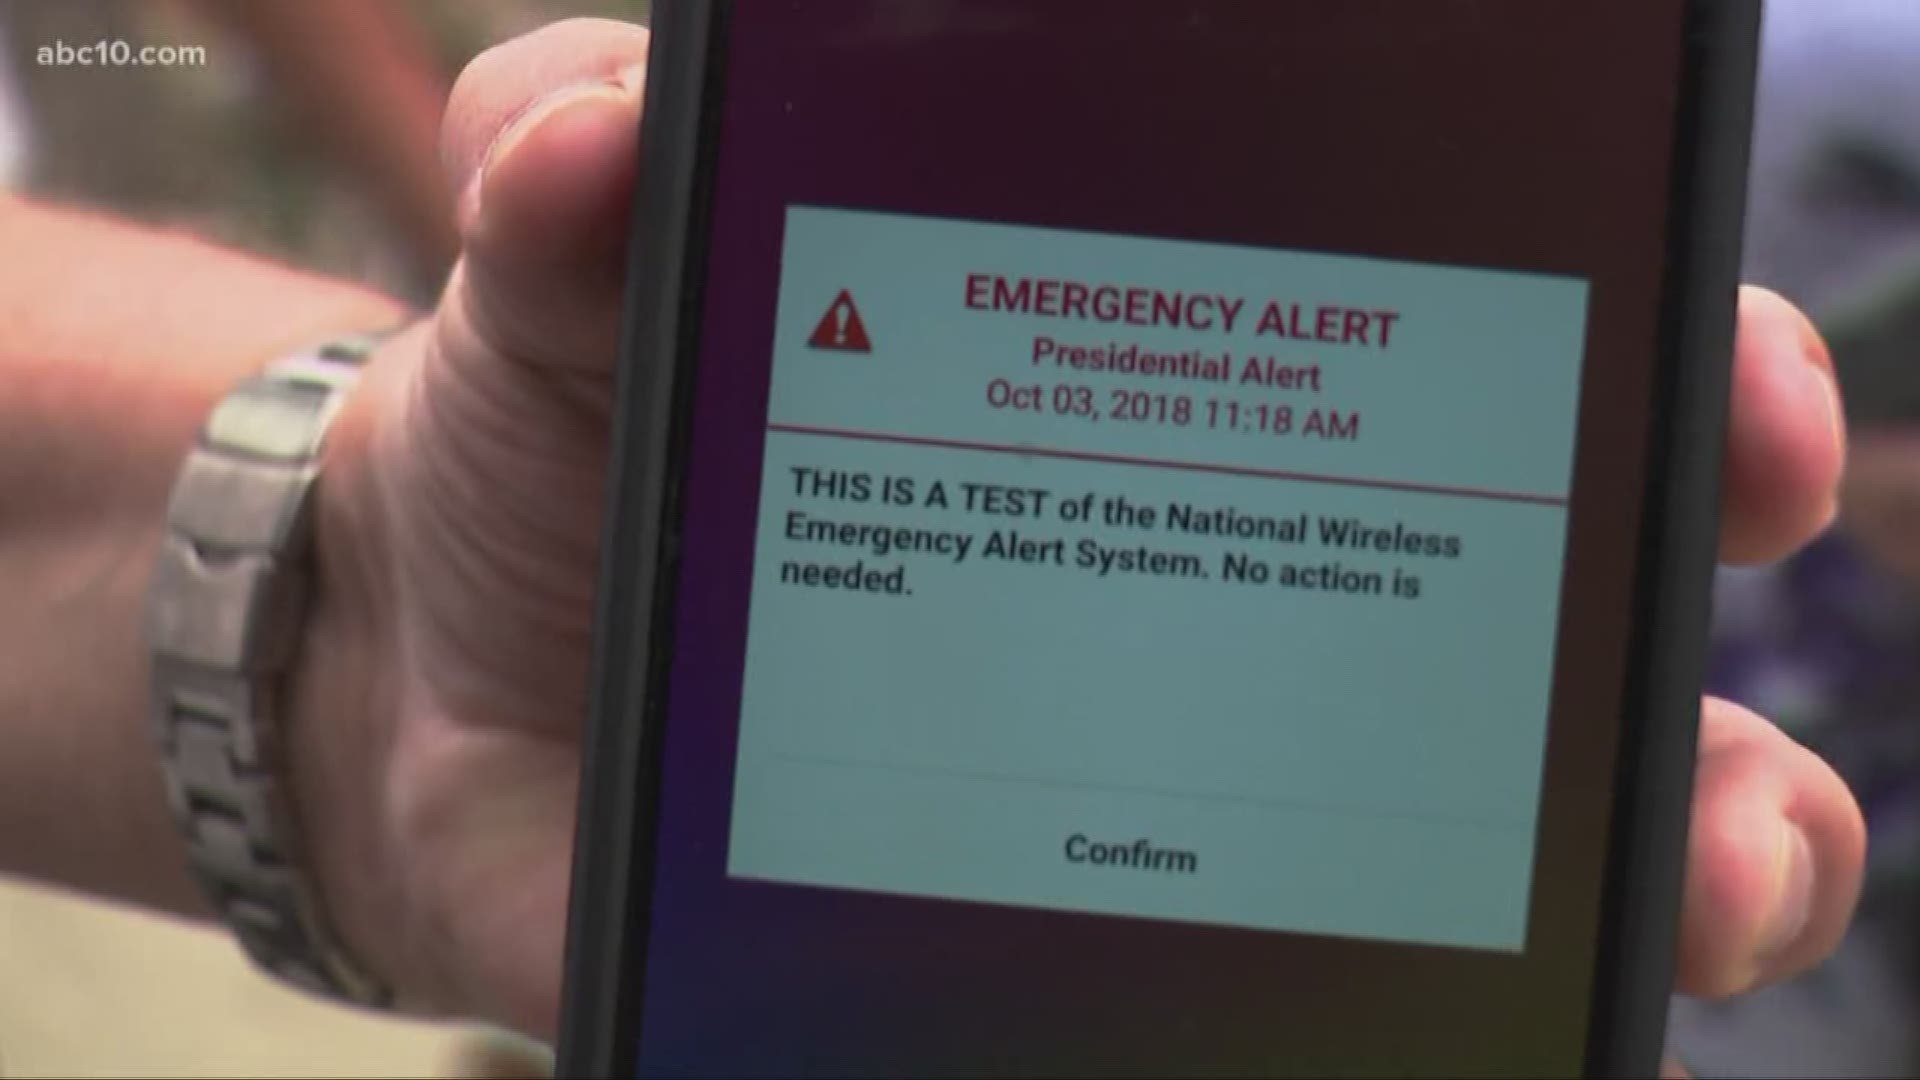 So many alerts: A breakdown of the major emergency alerts | abc10.com